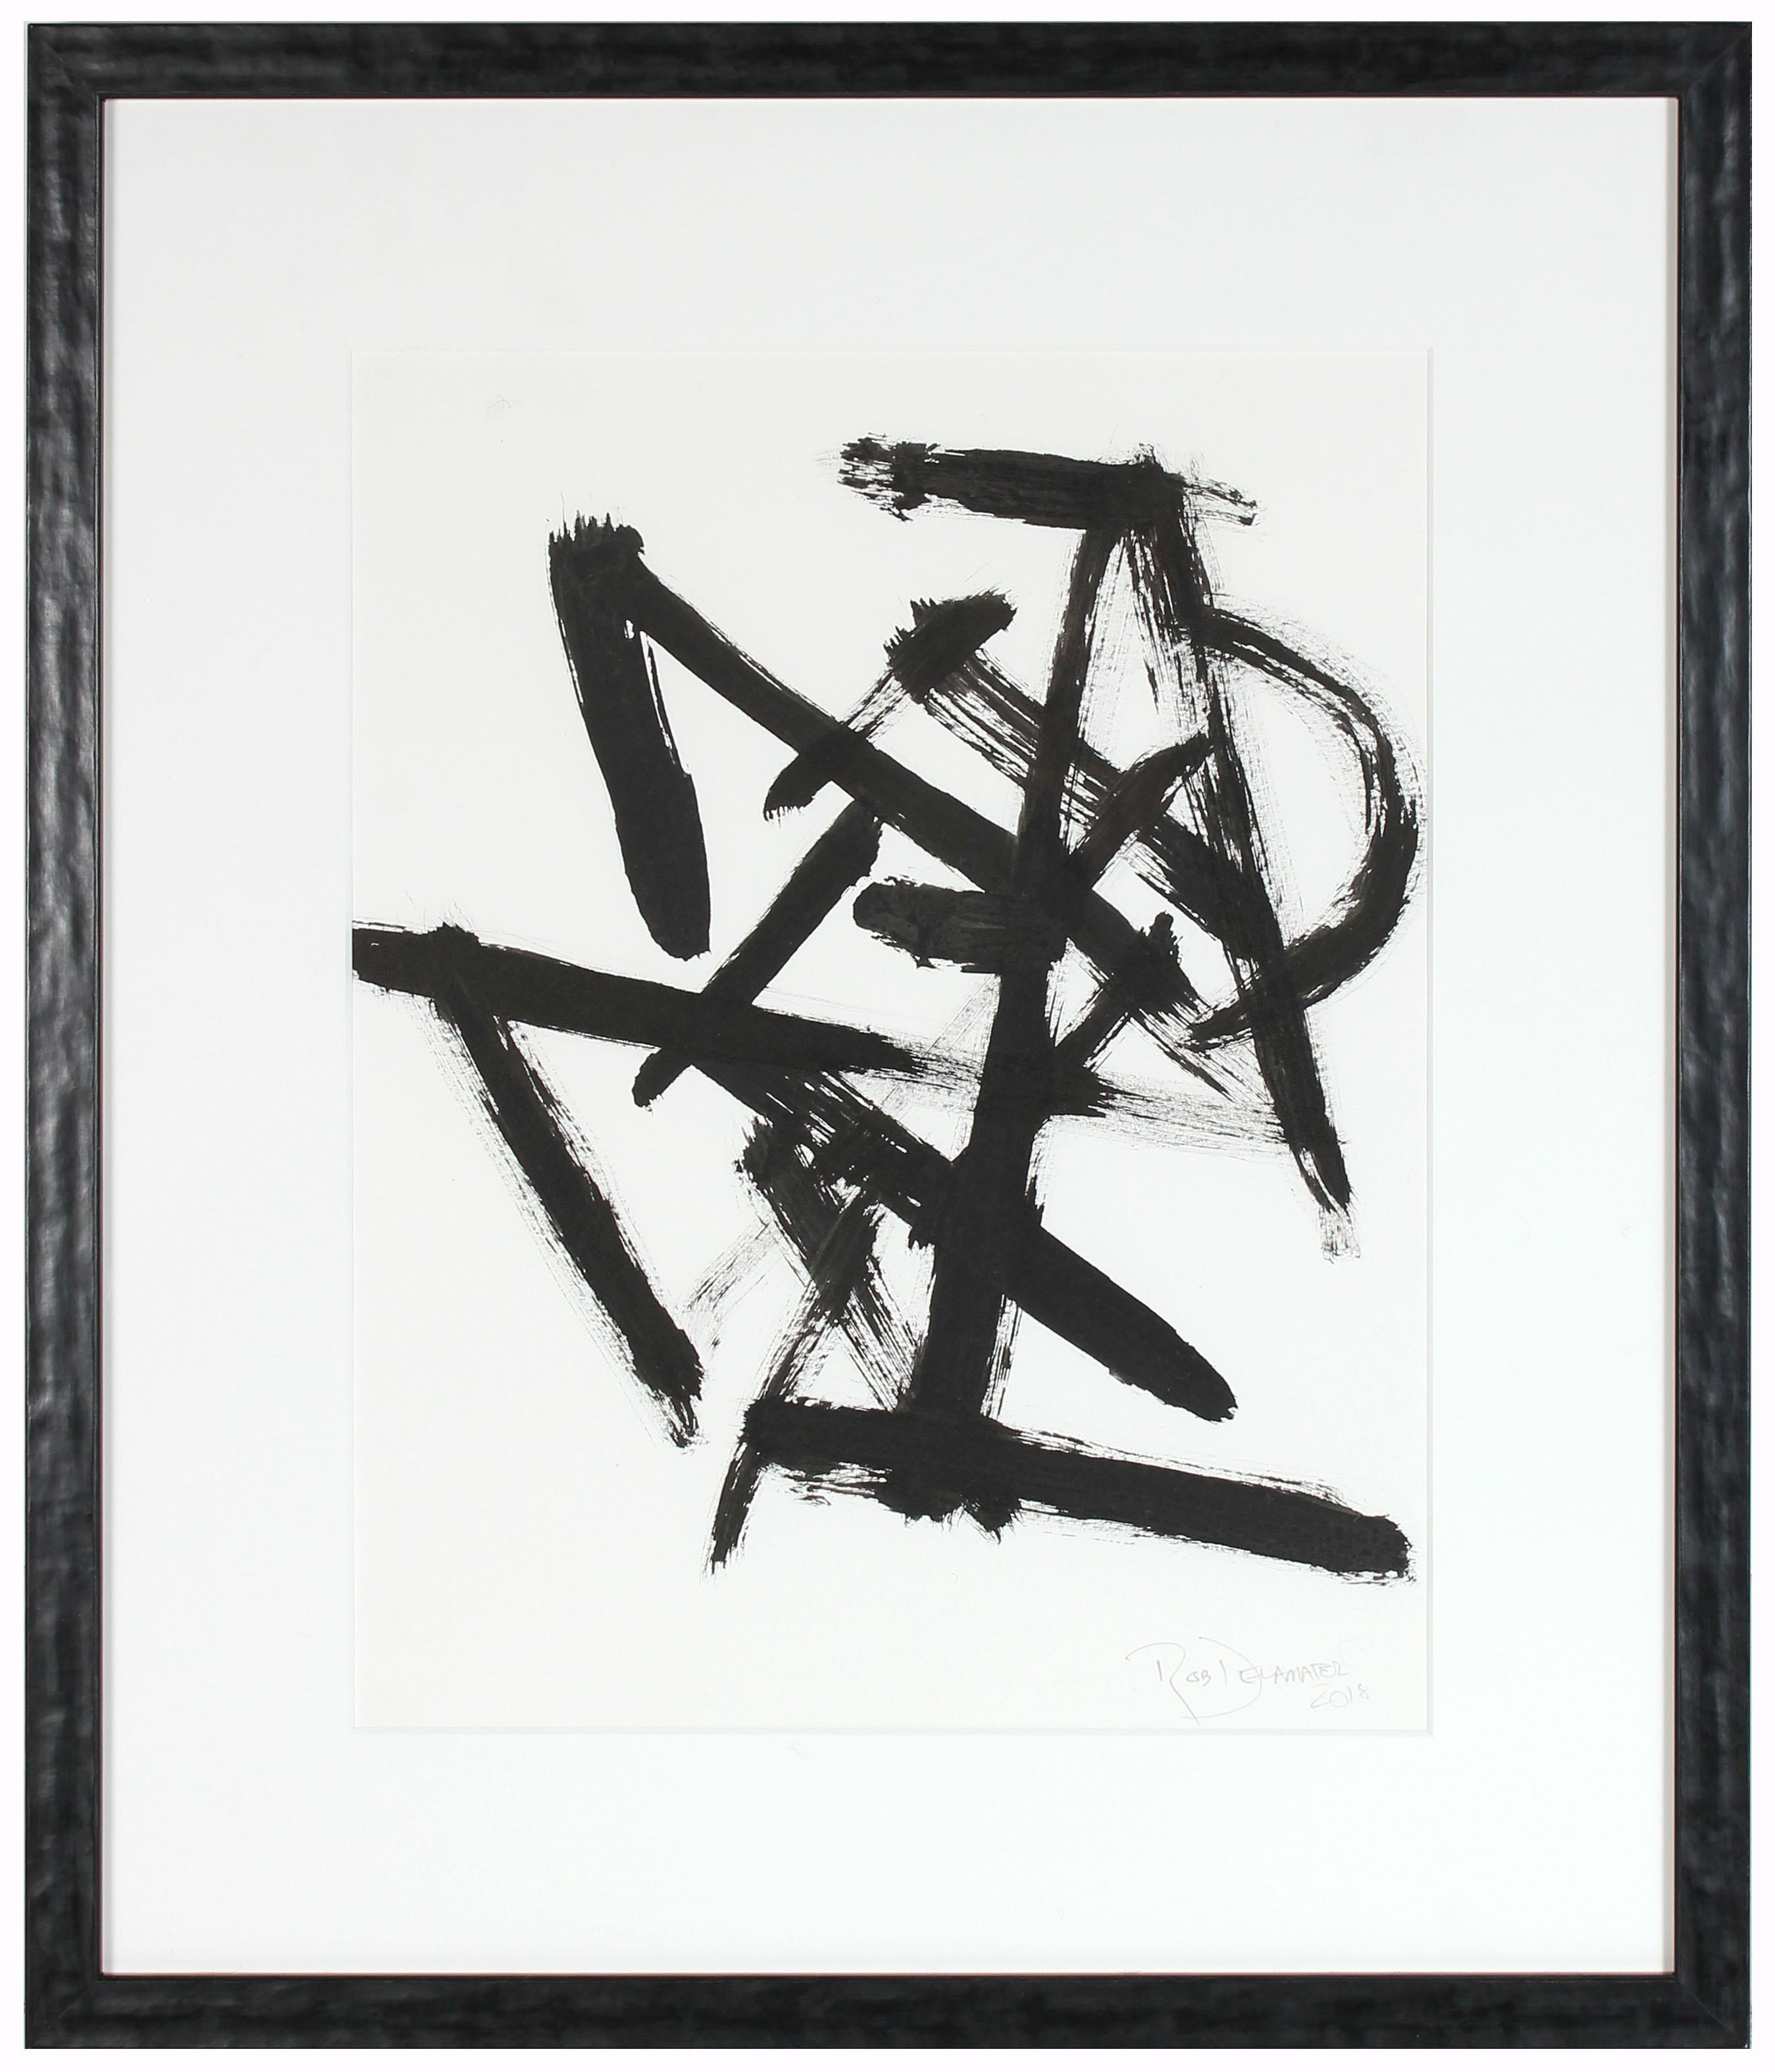 Rob Delamater Abstract Drawing - "Parlance II" 2018, Monochromatic Abstract Expressionist Black Ink Drawing 